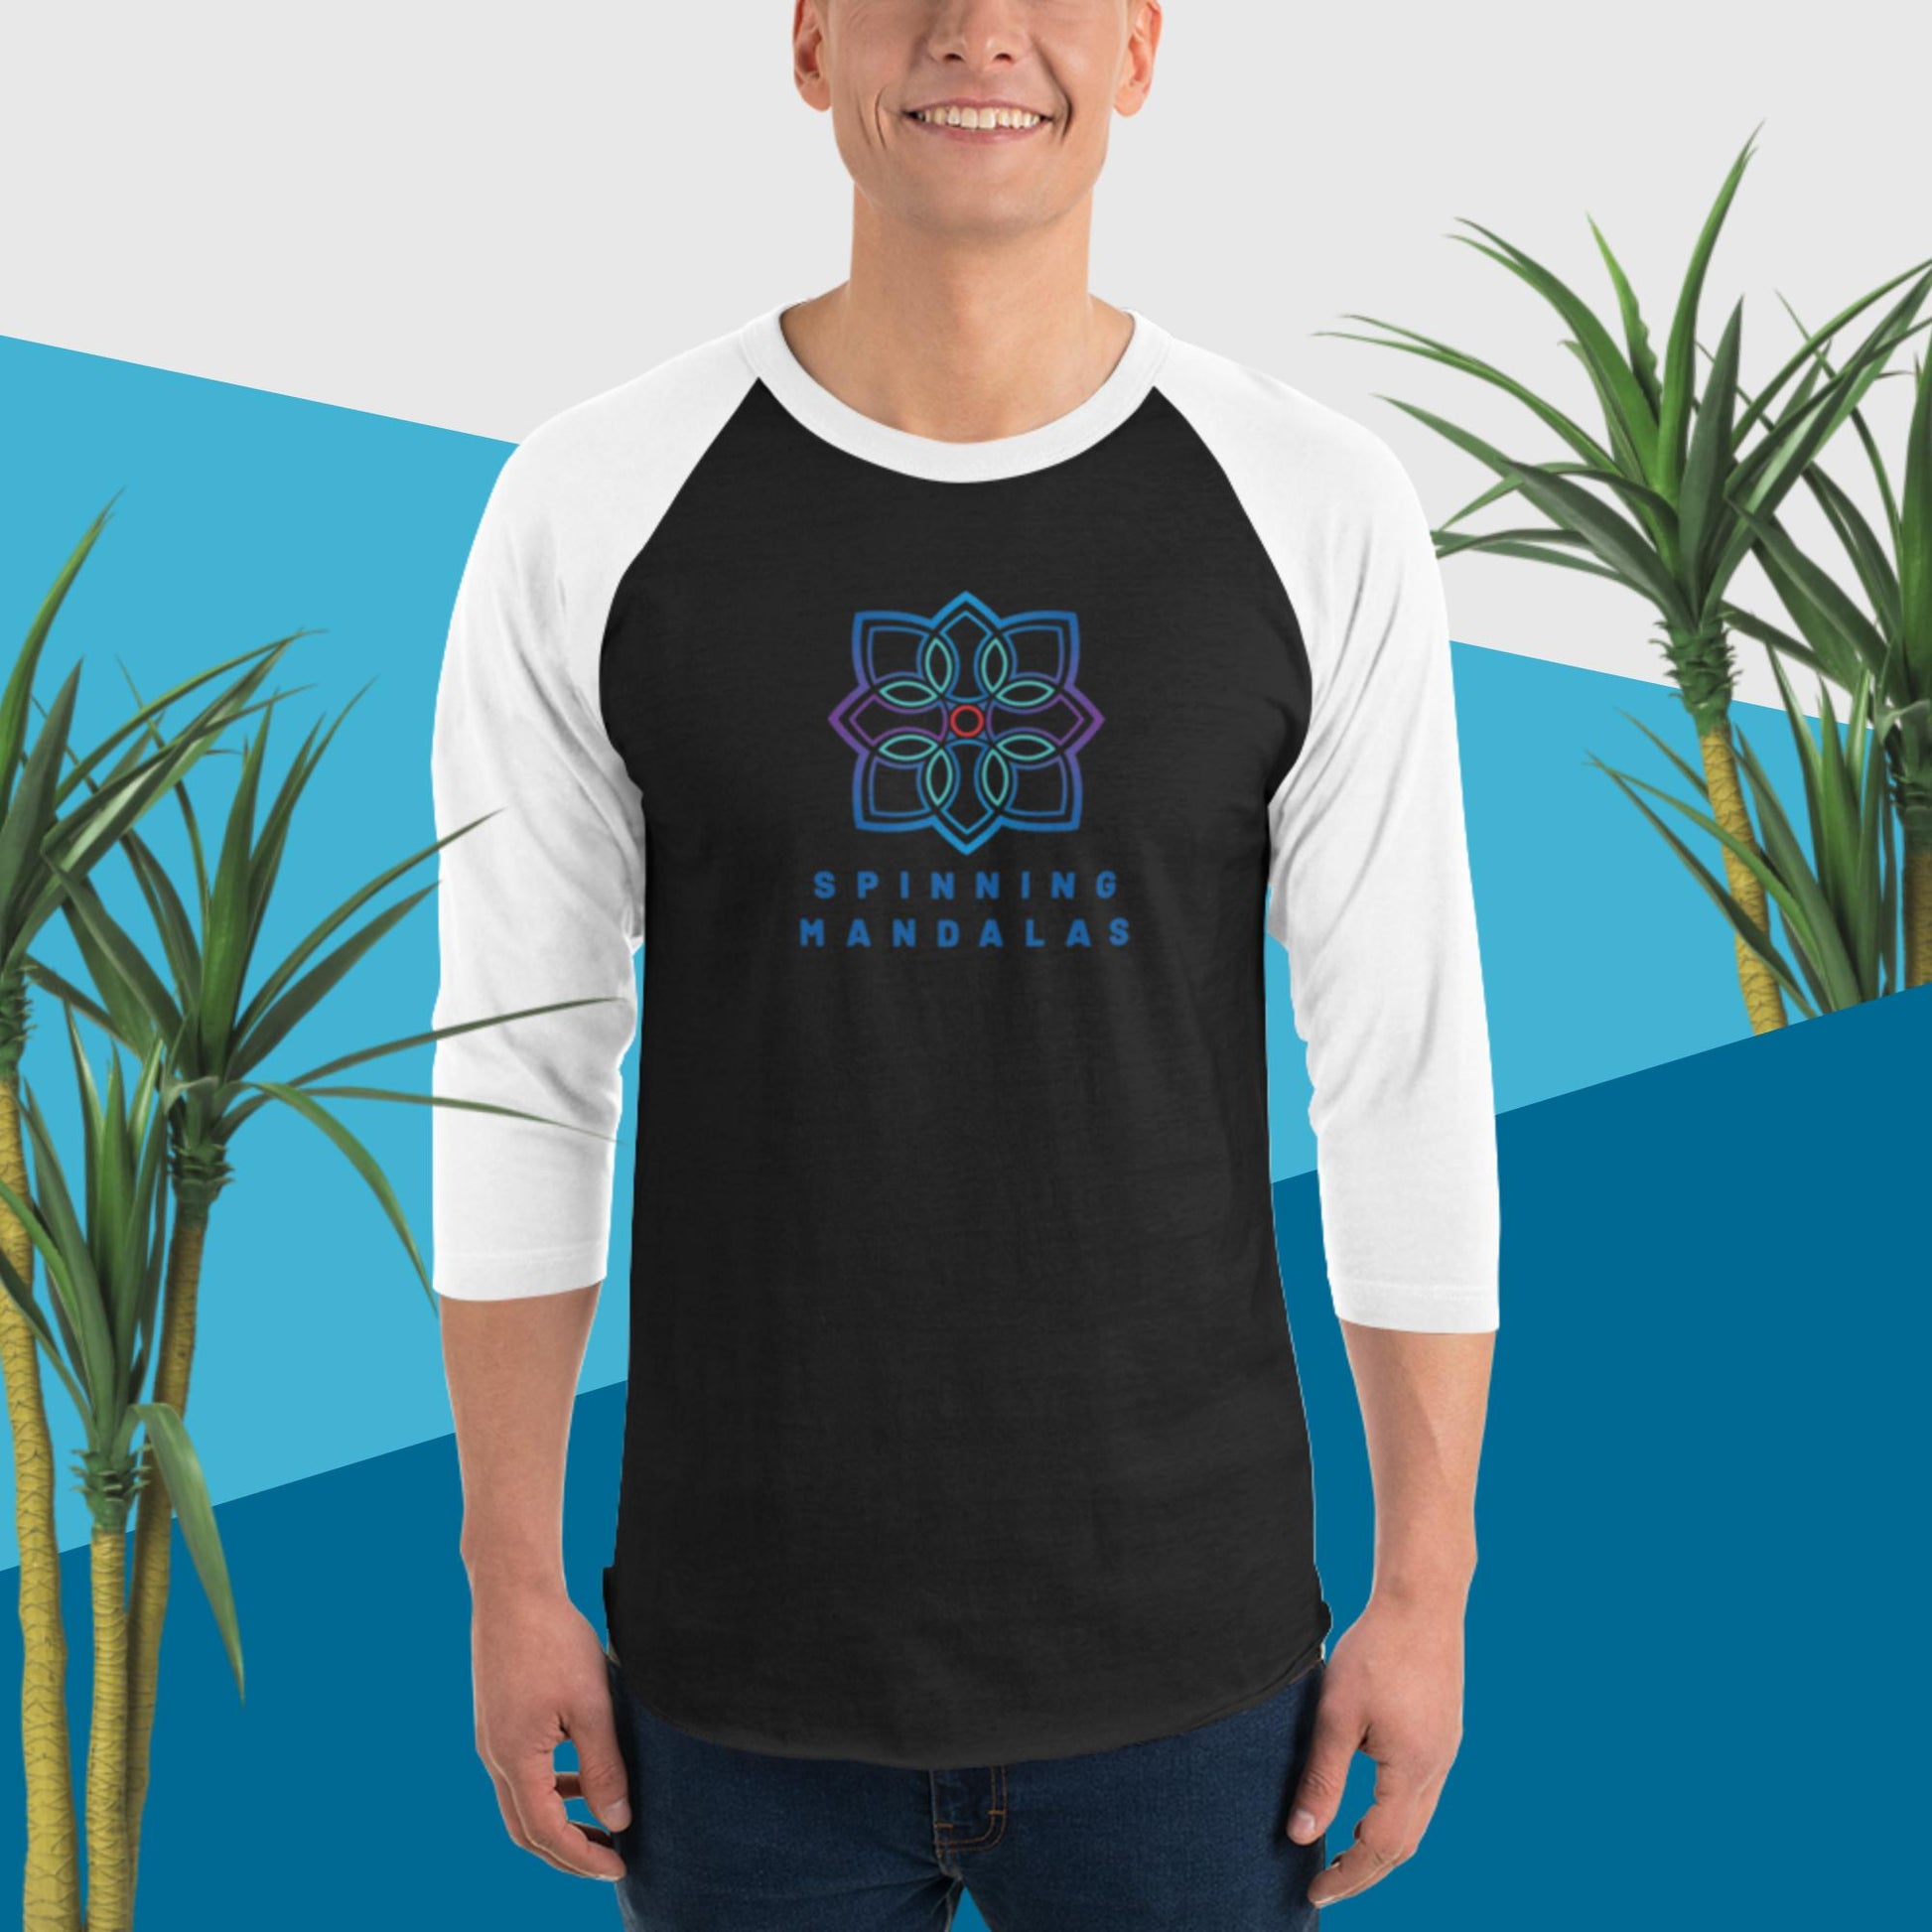 Black with White 3/4 sleeve Baseball T-shirt. Multiple color combinations available. Brand. Clothing. Cotton. Cotton blend. Spinning Mandalas spinningmandalas.com